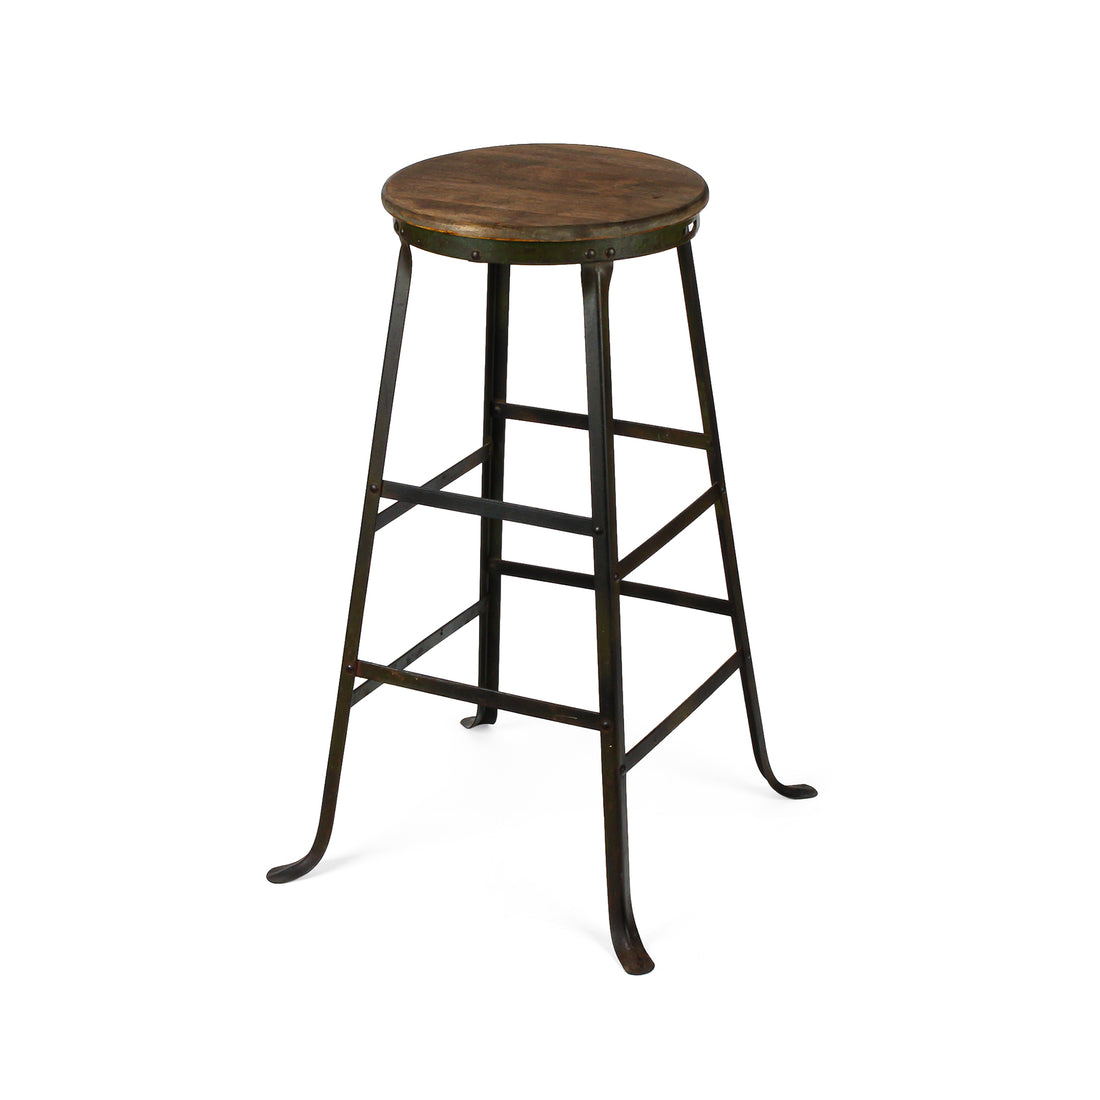 Vintage Industrial Steel Stool with Wooden Seat